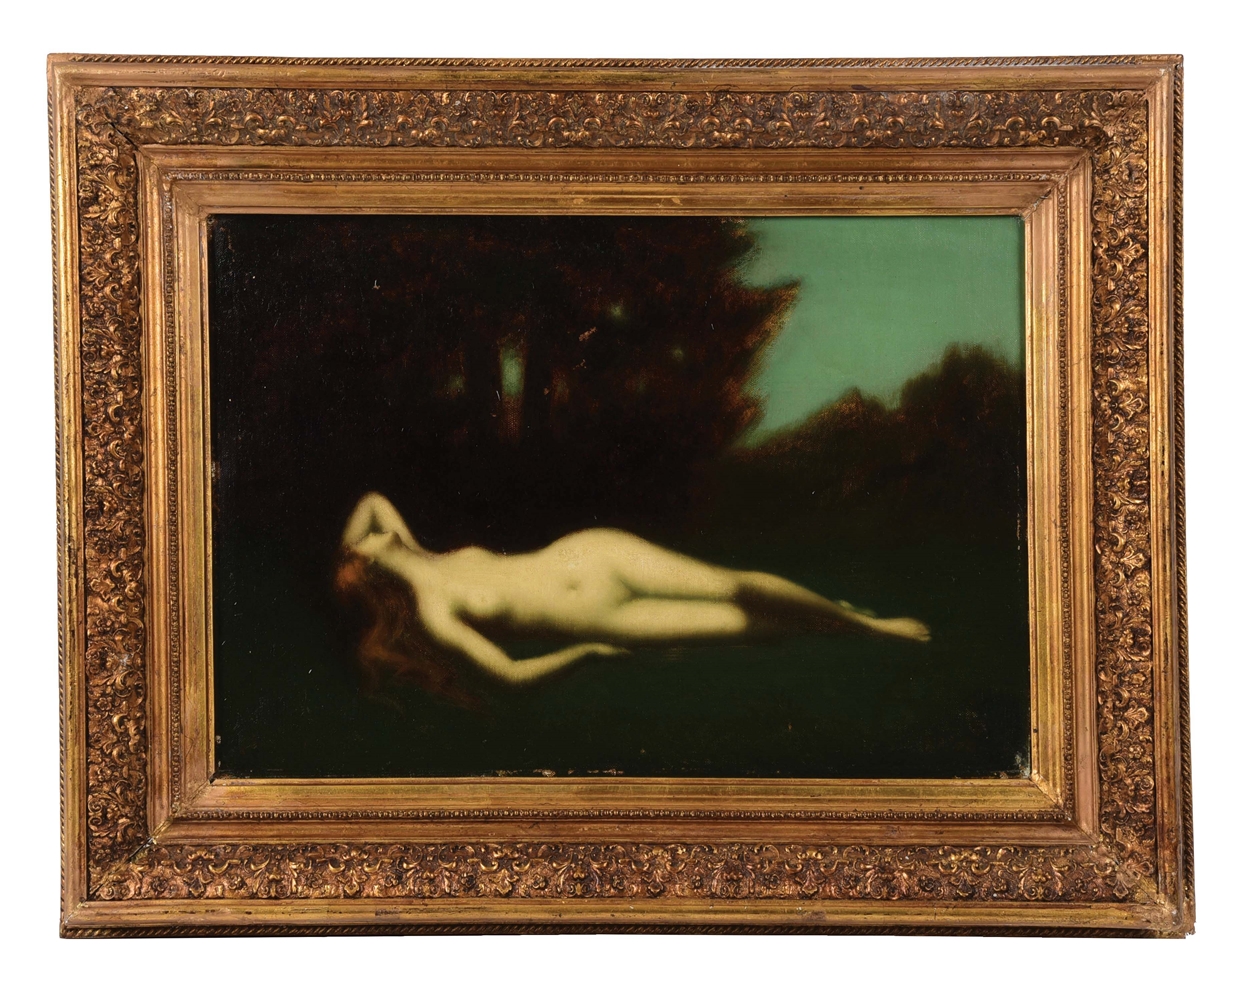 MANNER OF JEAN-JACQUES HENNER. NUDE IN A FOREST.